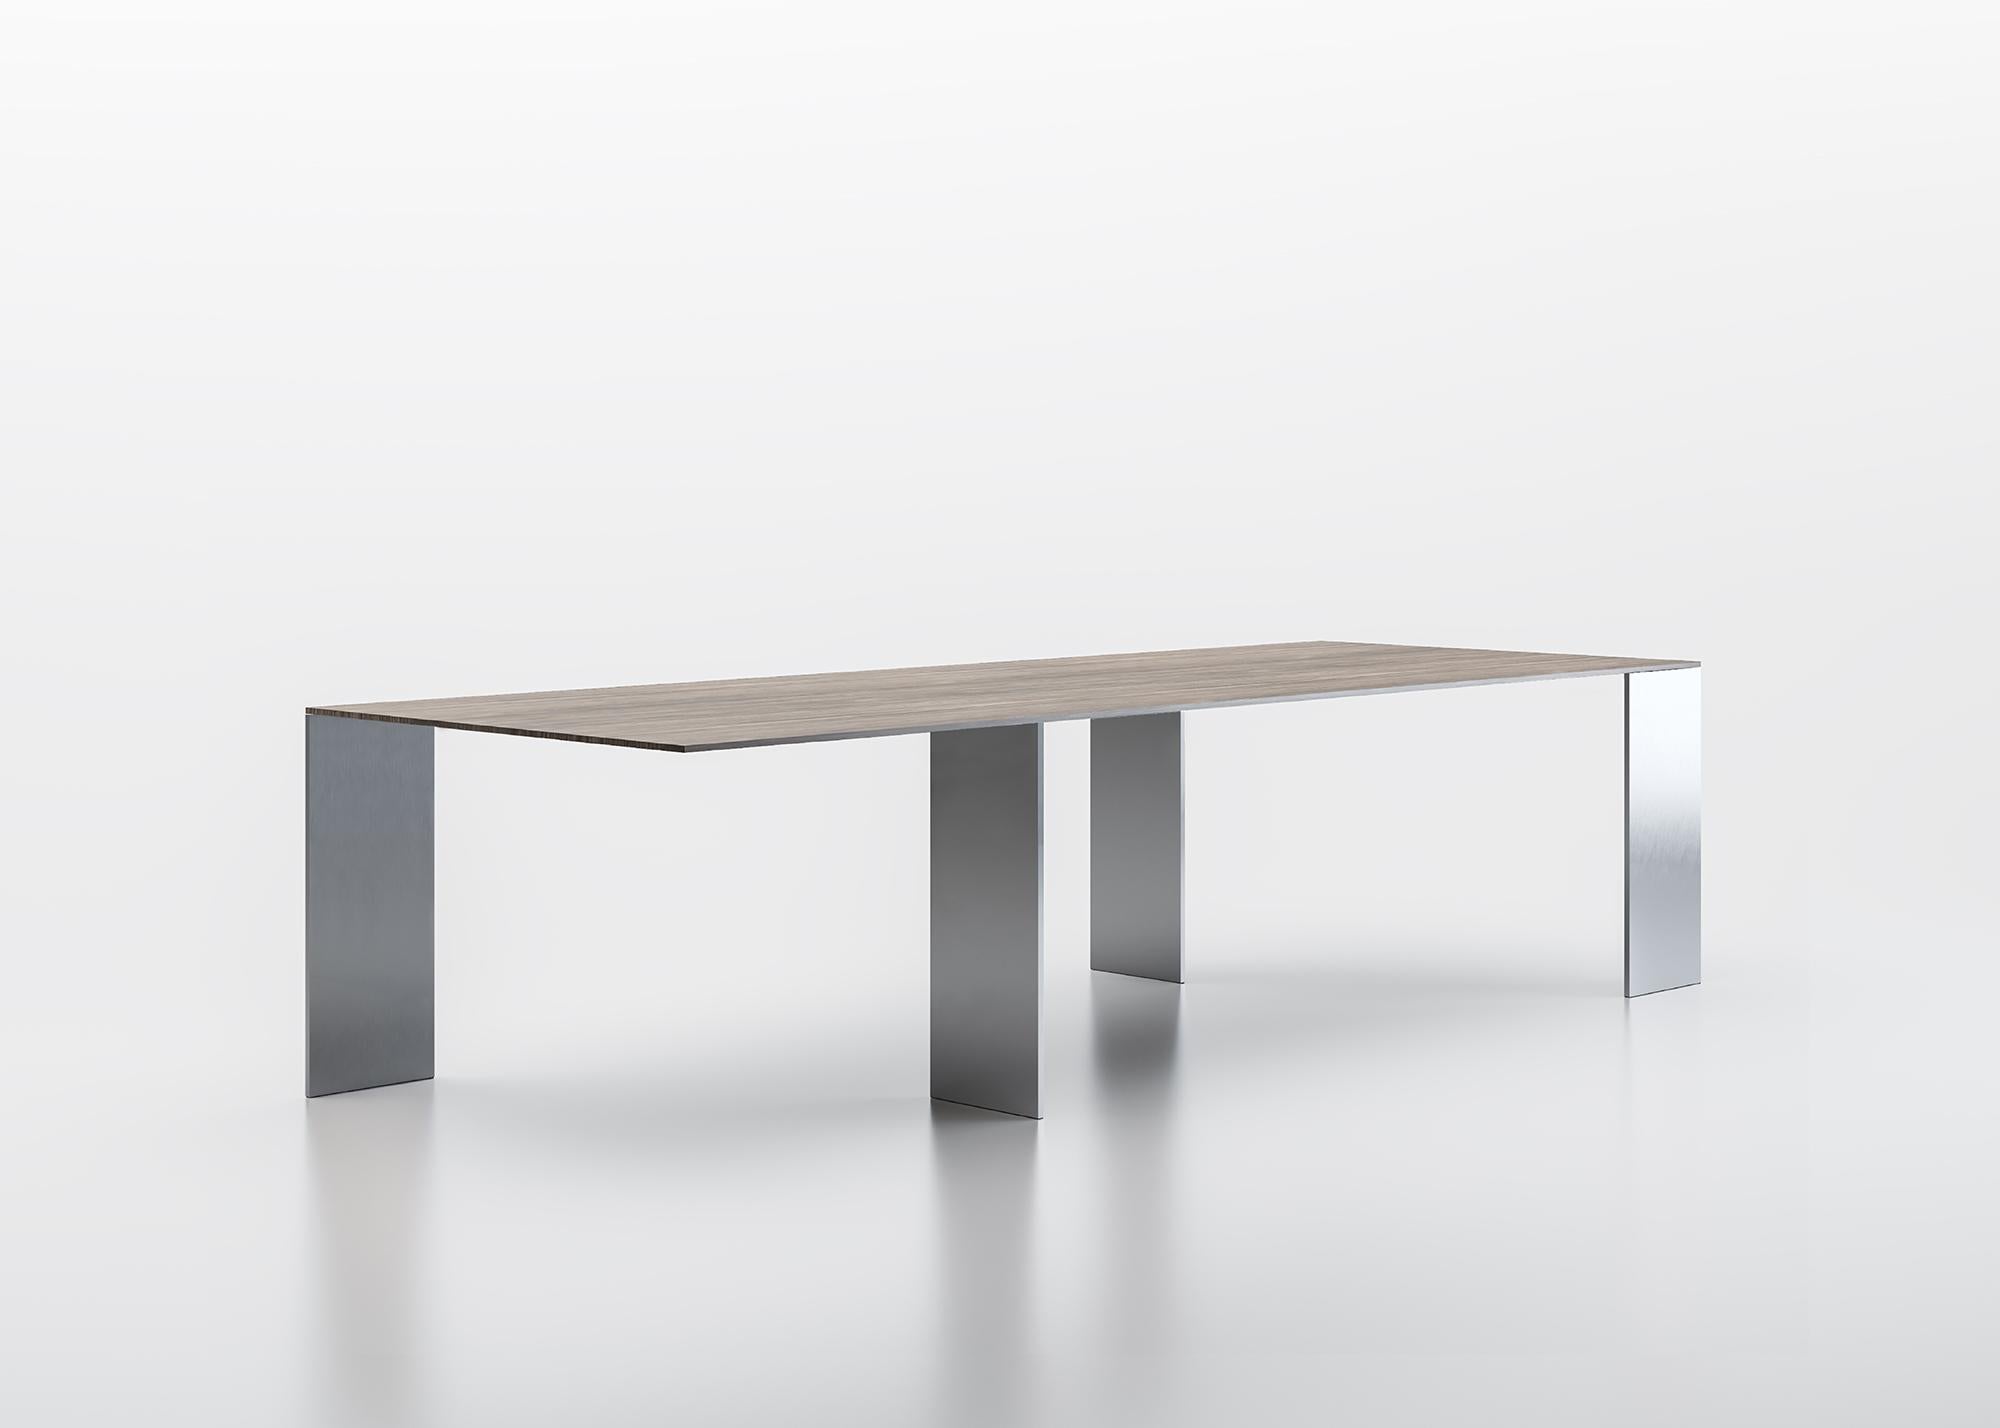 Table with extra-thin top, made of composite material veneered with precious woods, or in lacquered glass, supported by legs, placed onto opposite perpendicular axes. Wood top thickness mm 14, glass top in back-lacquered extraclear glass thickness